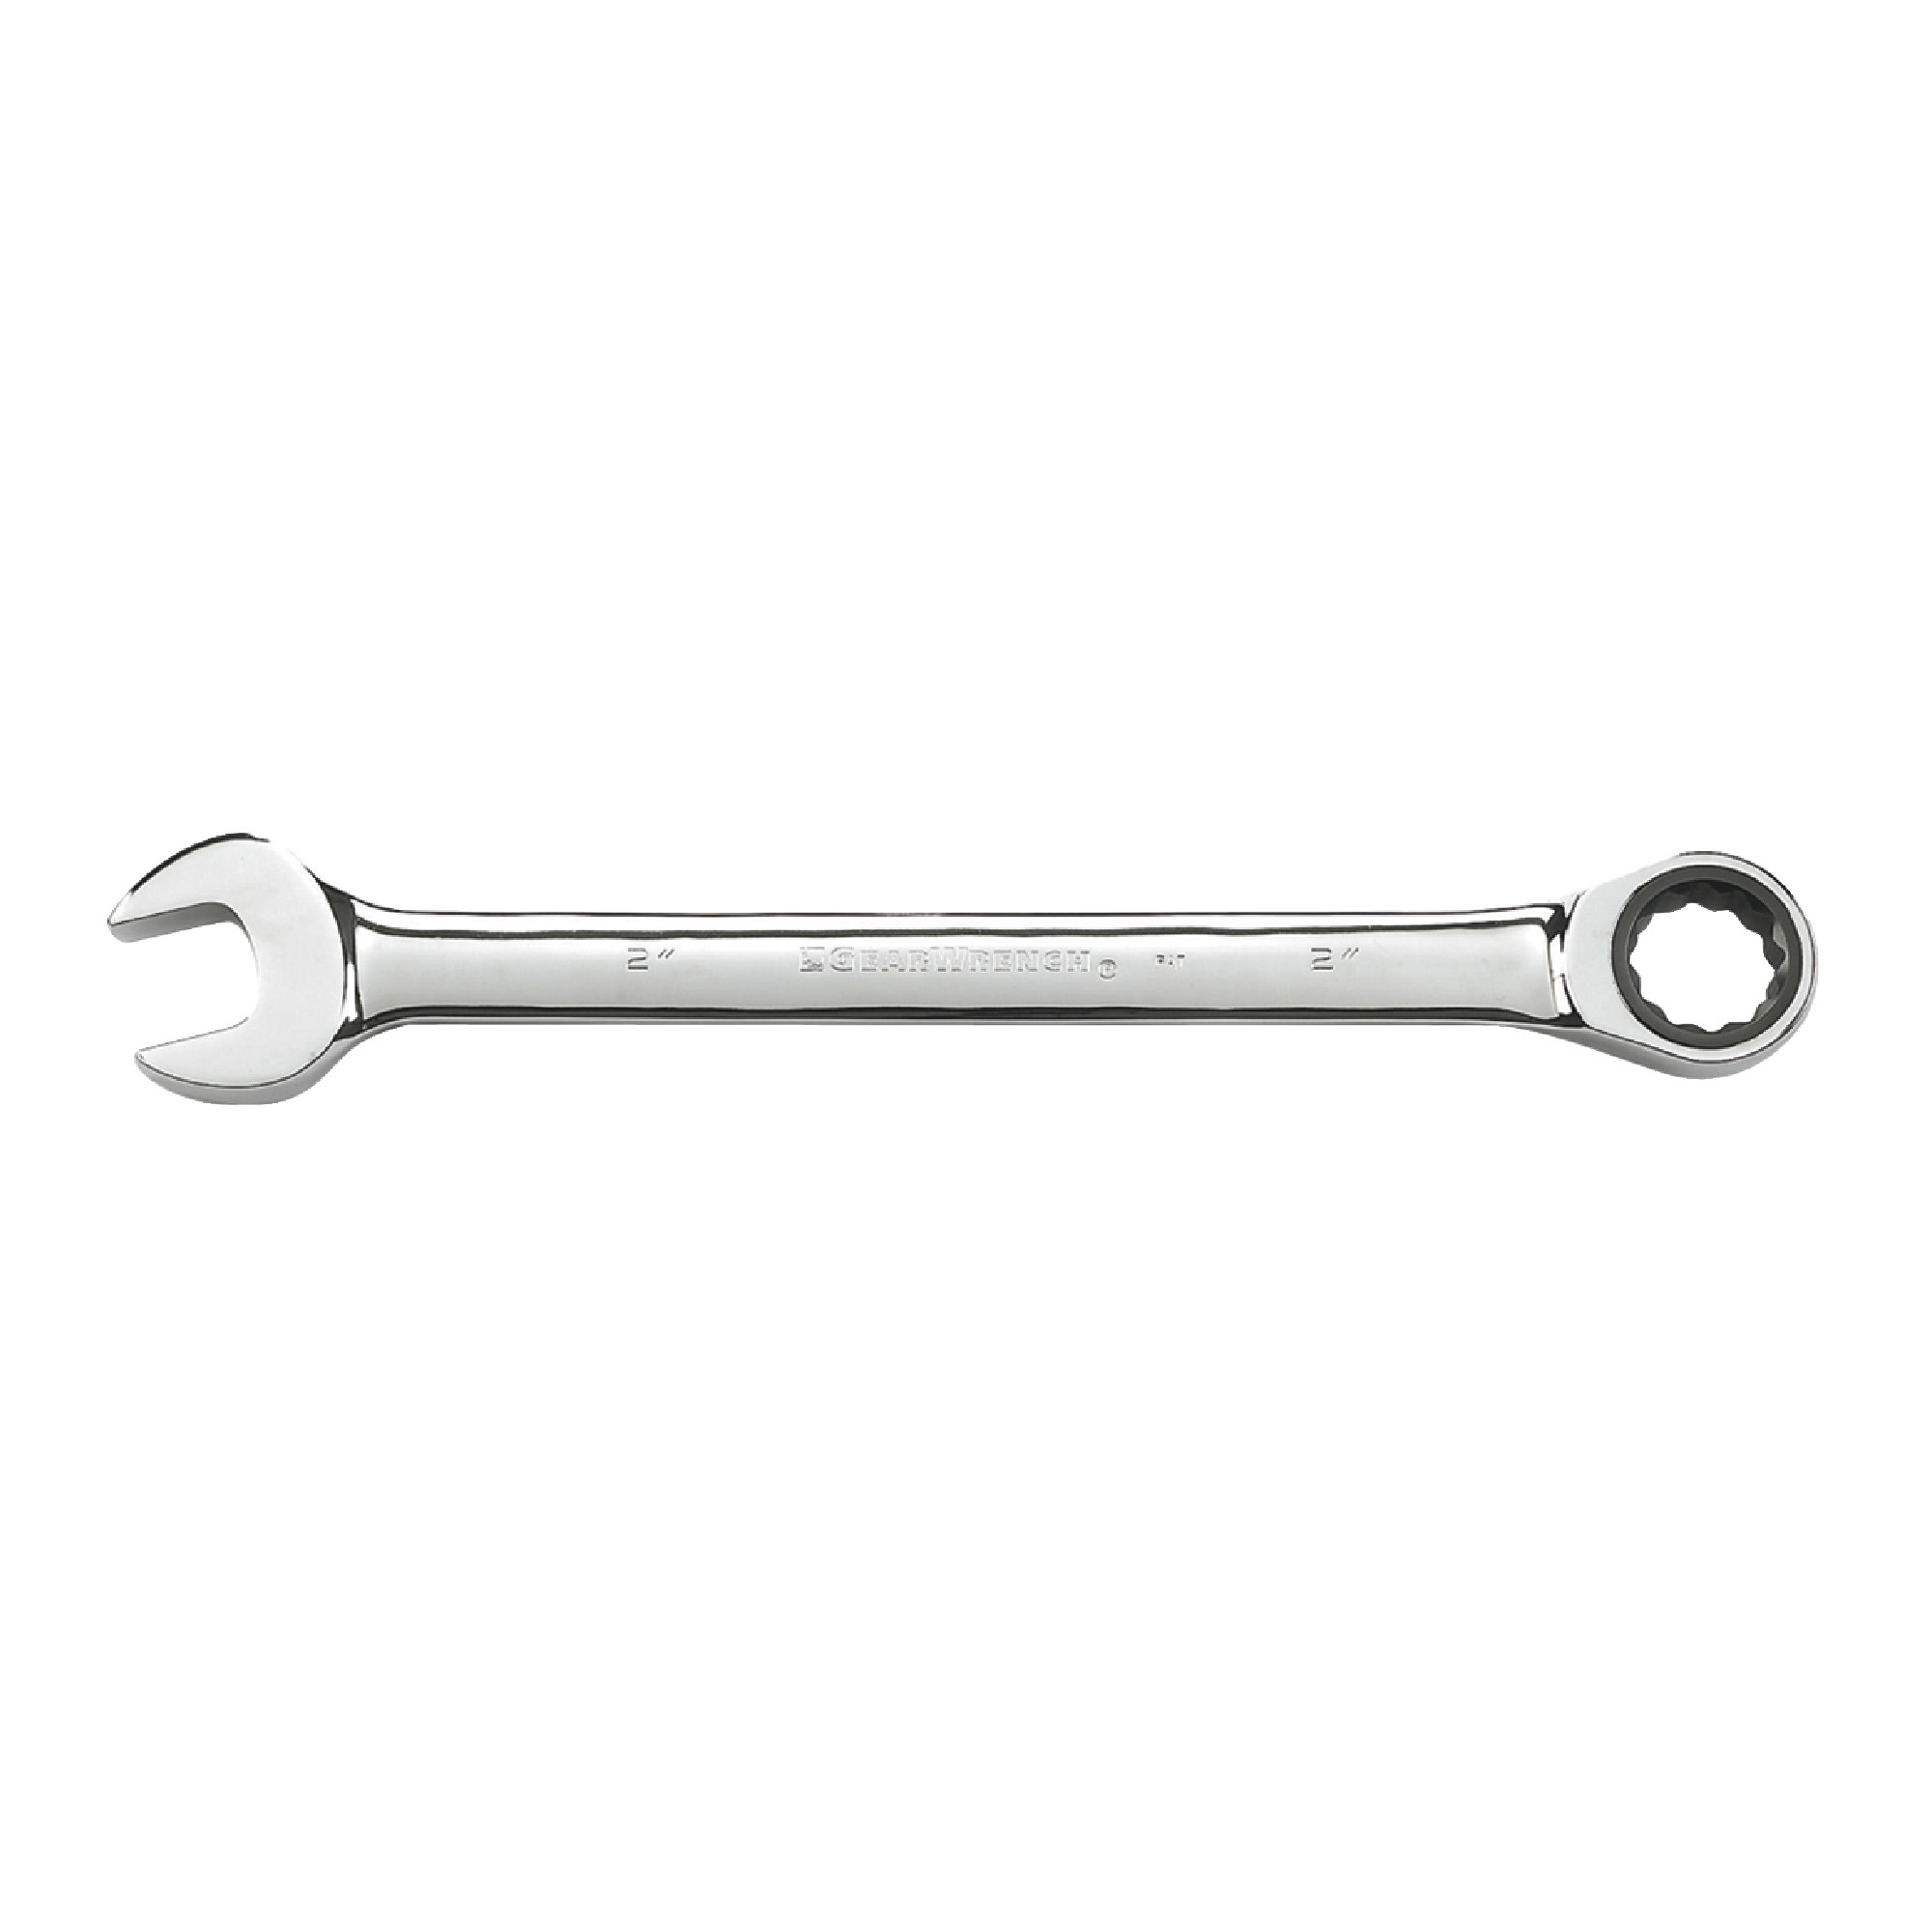 1-3/4" 12 Point Jumbo Ratcheting Combination Wrench